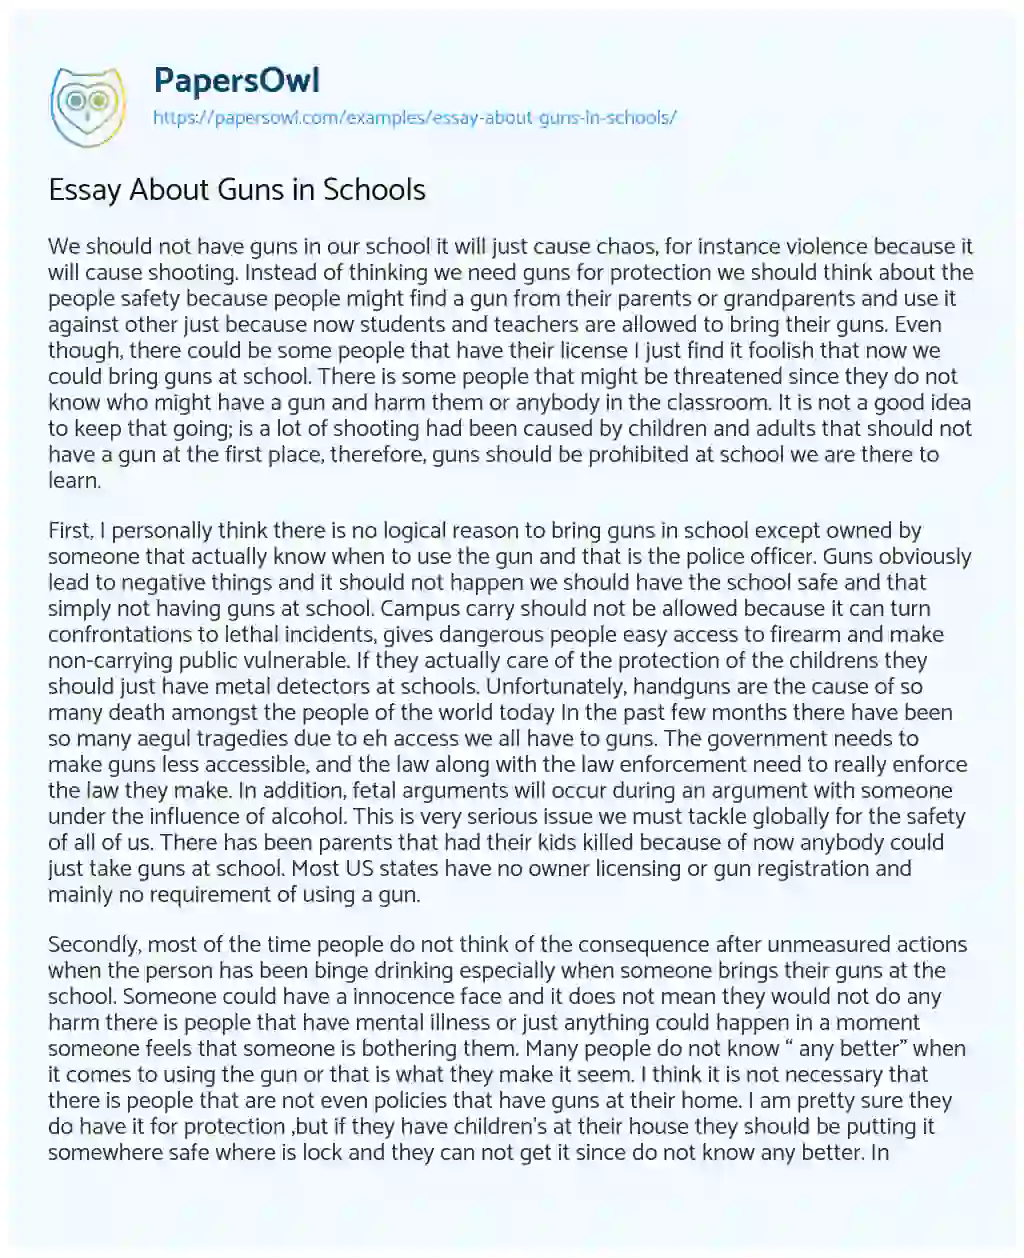 Essay on Essay about Guns in Schools